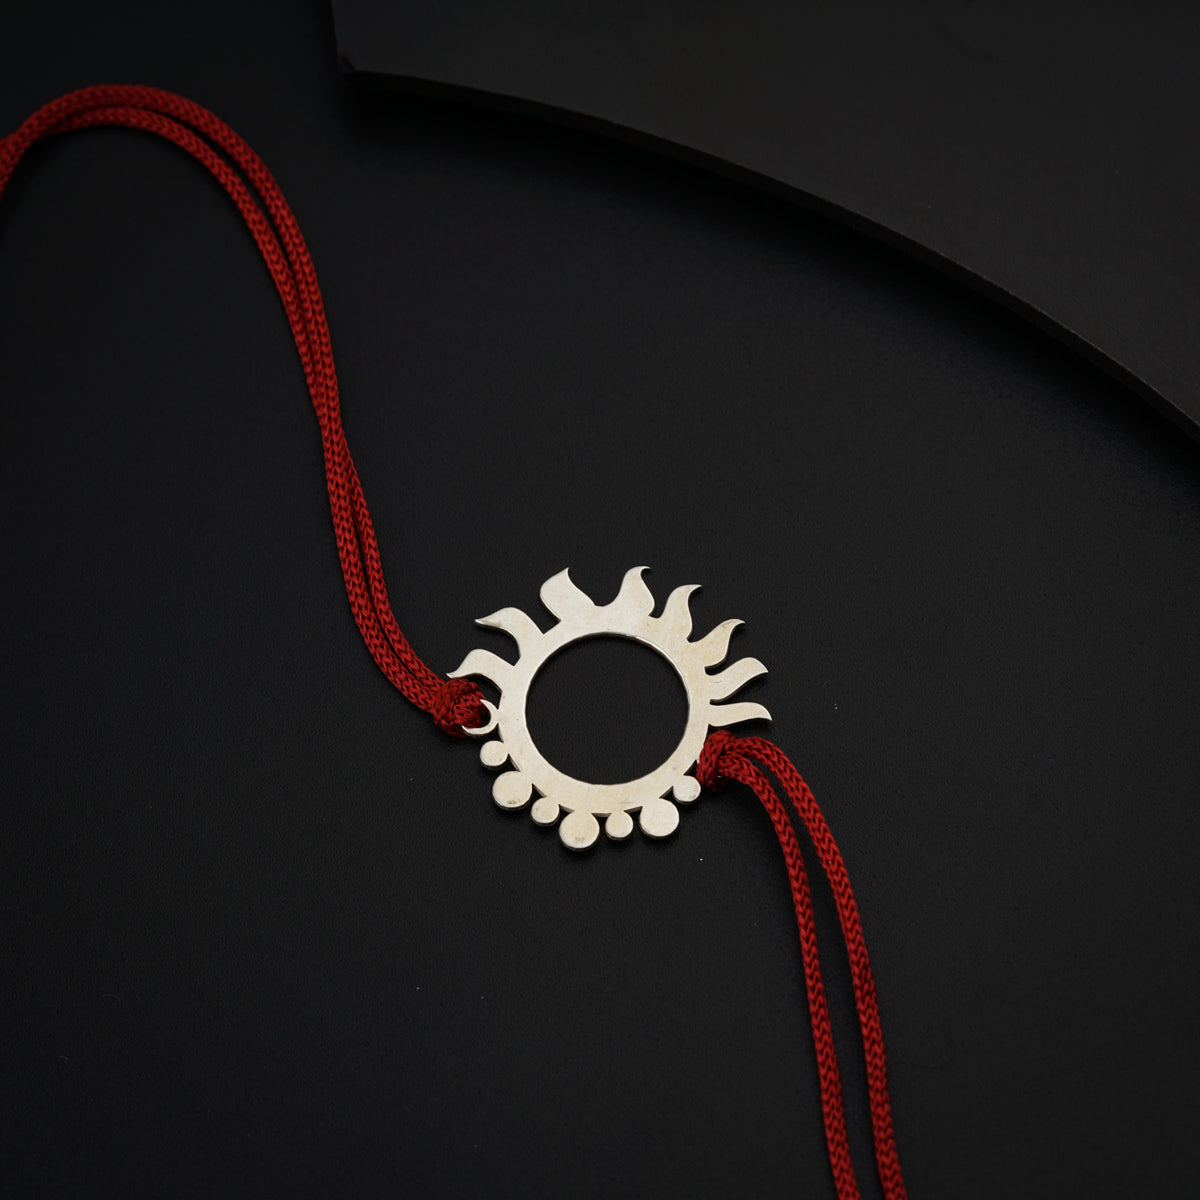 a red string with a circular pendant on it